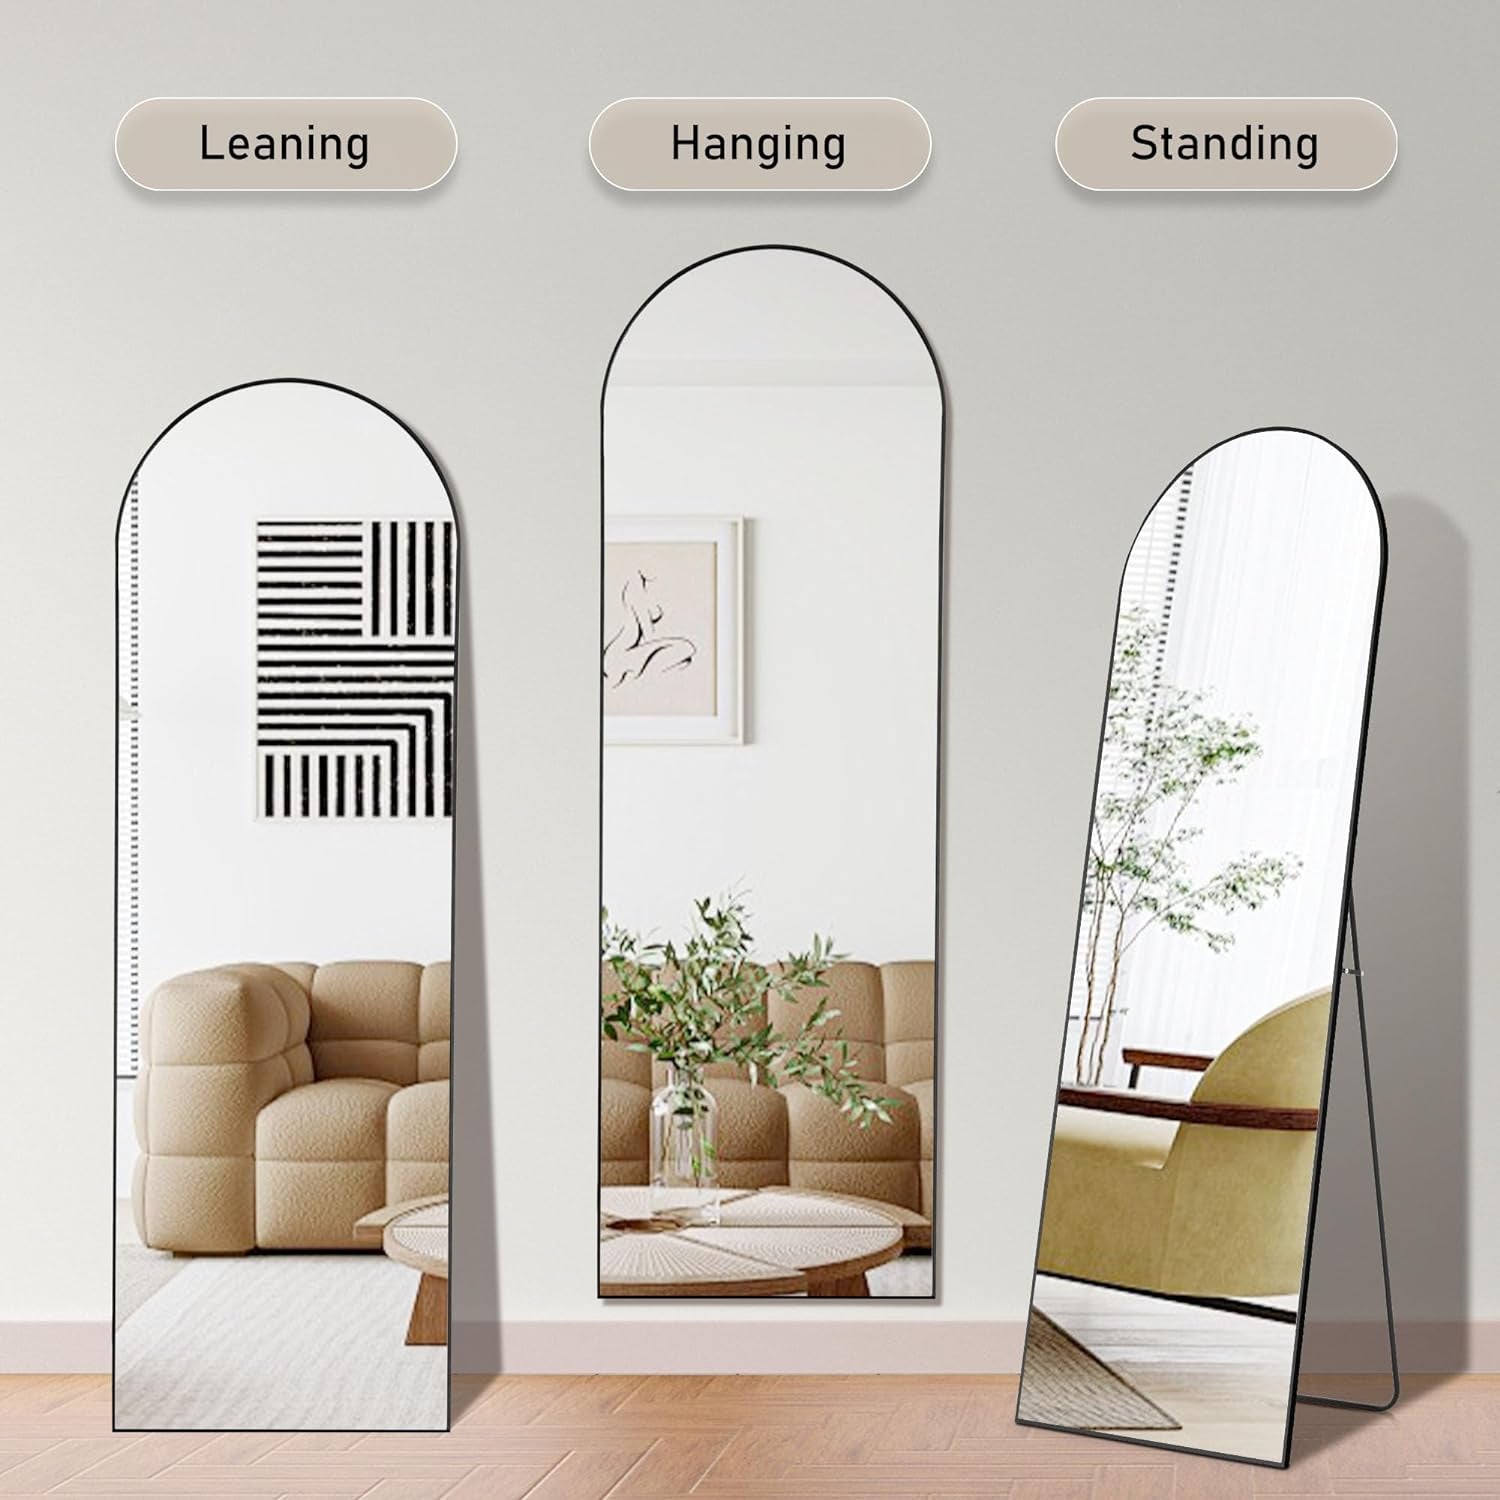 Arched Full Length Mirror 64"X21" for Bedroom, Full Body Mirror with Stand, Hanging or Leaning for Wall, Aluminum Alloy Thin Frame Floor Standing for Living Room, Tall, Black